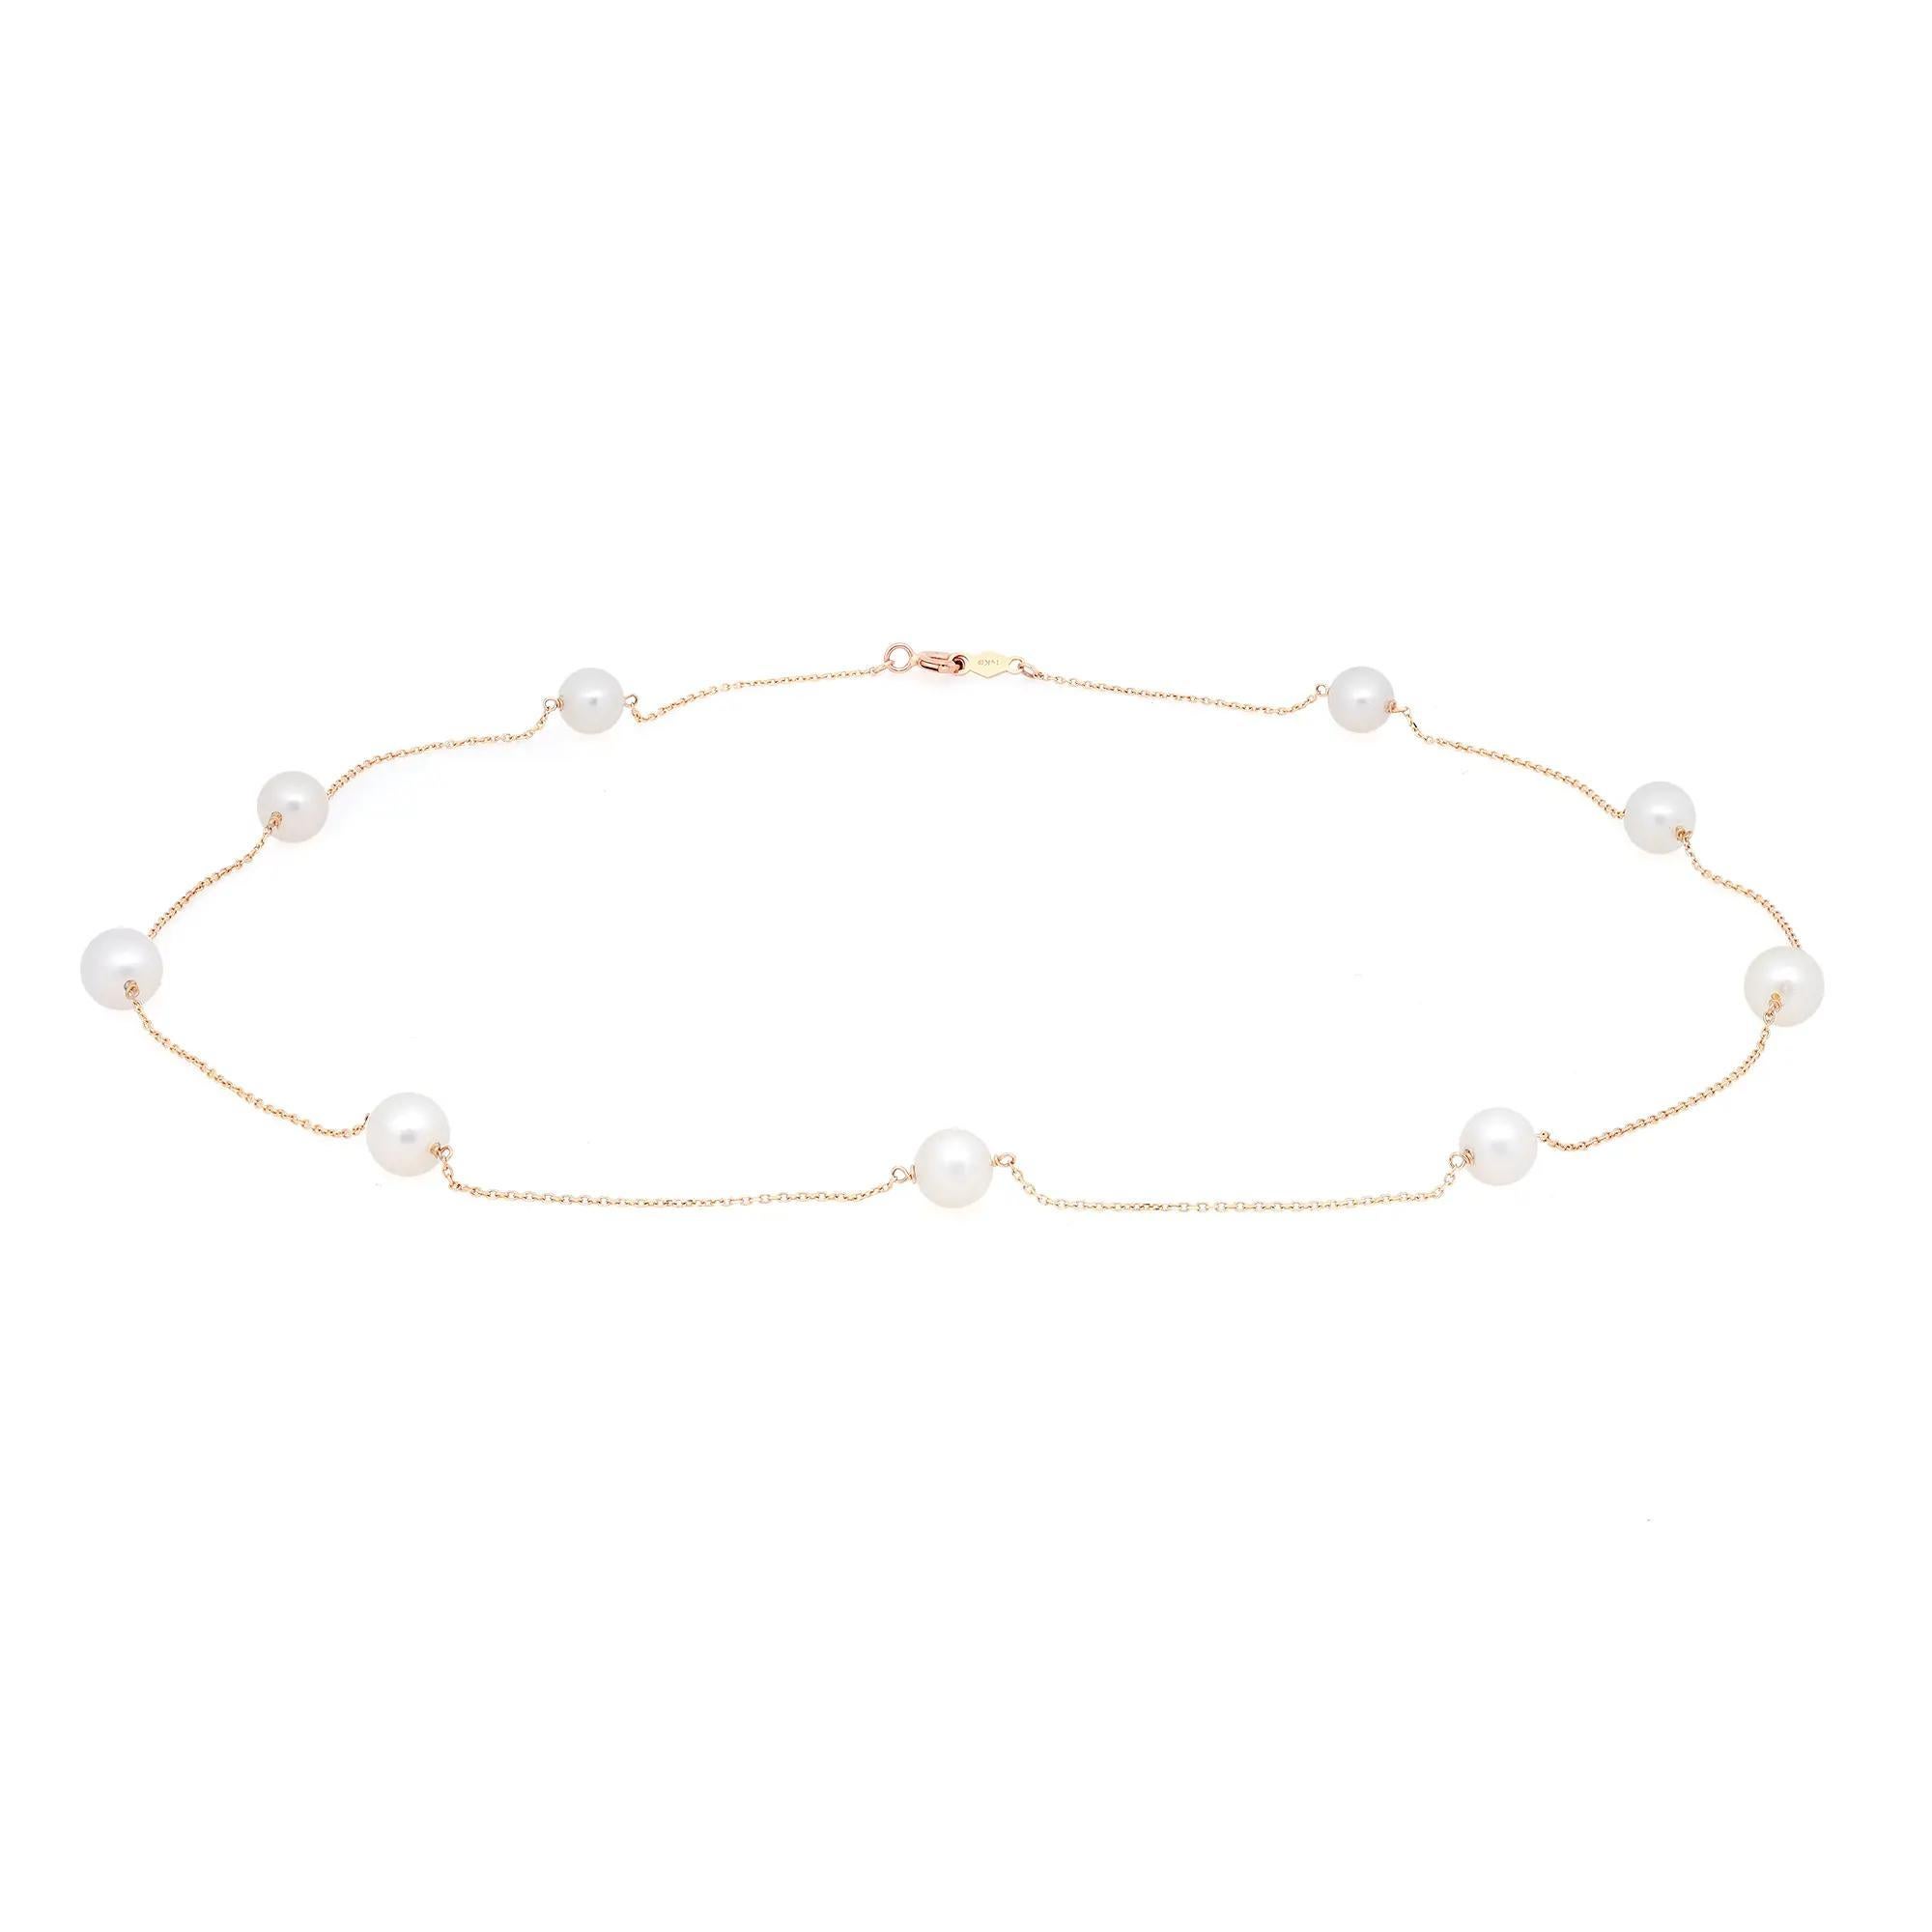 Beautiful and delicate this pearl chain necklace will leave everyone speechless the moment they see it. Crafted in high polished solid 14K yellow gold this necklace is set with 9 round shaped white fresh water pearls. Be the first one to get it or